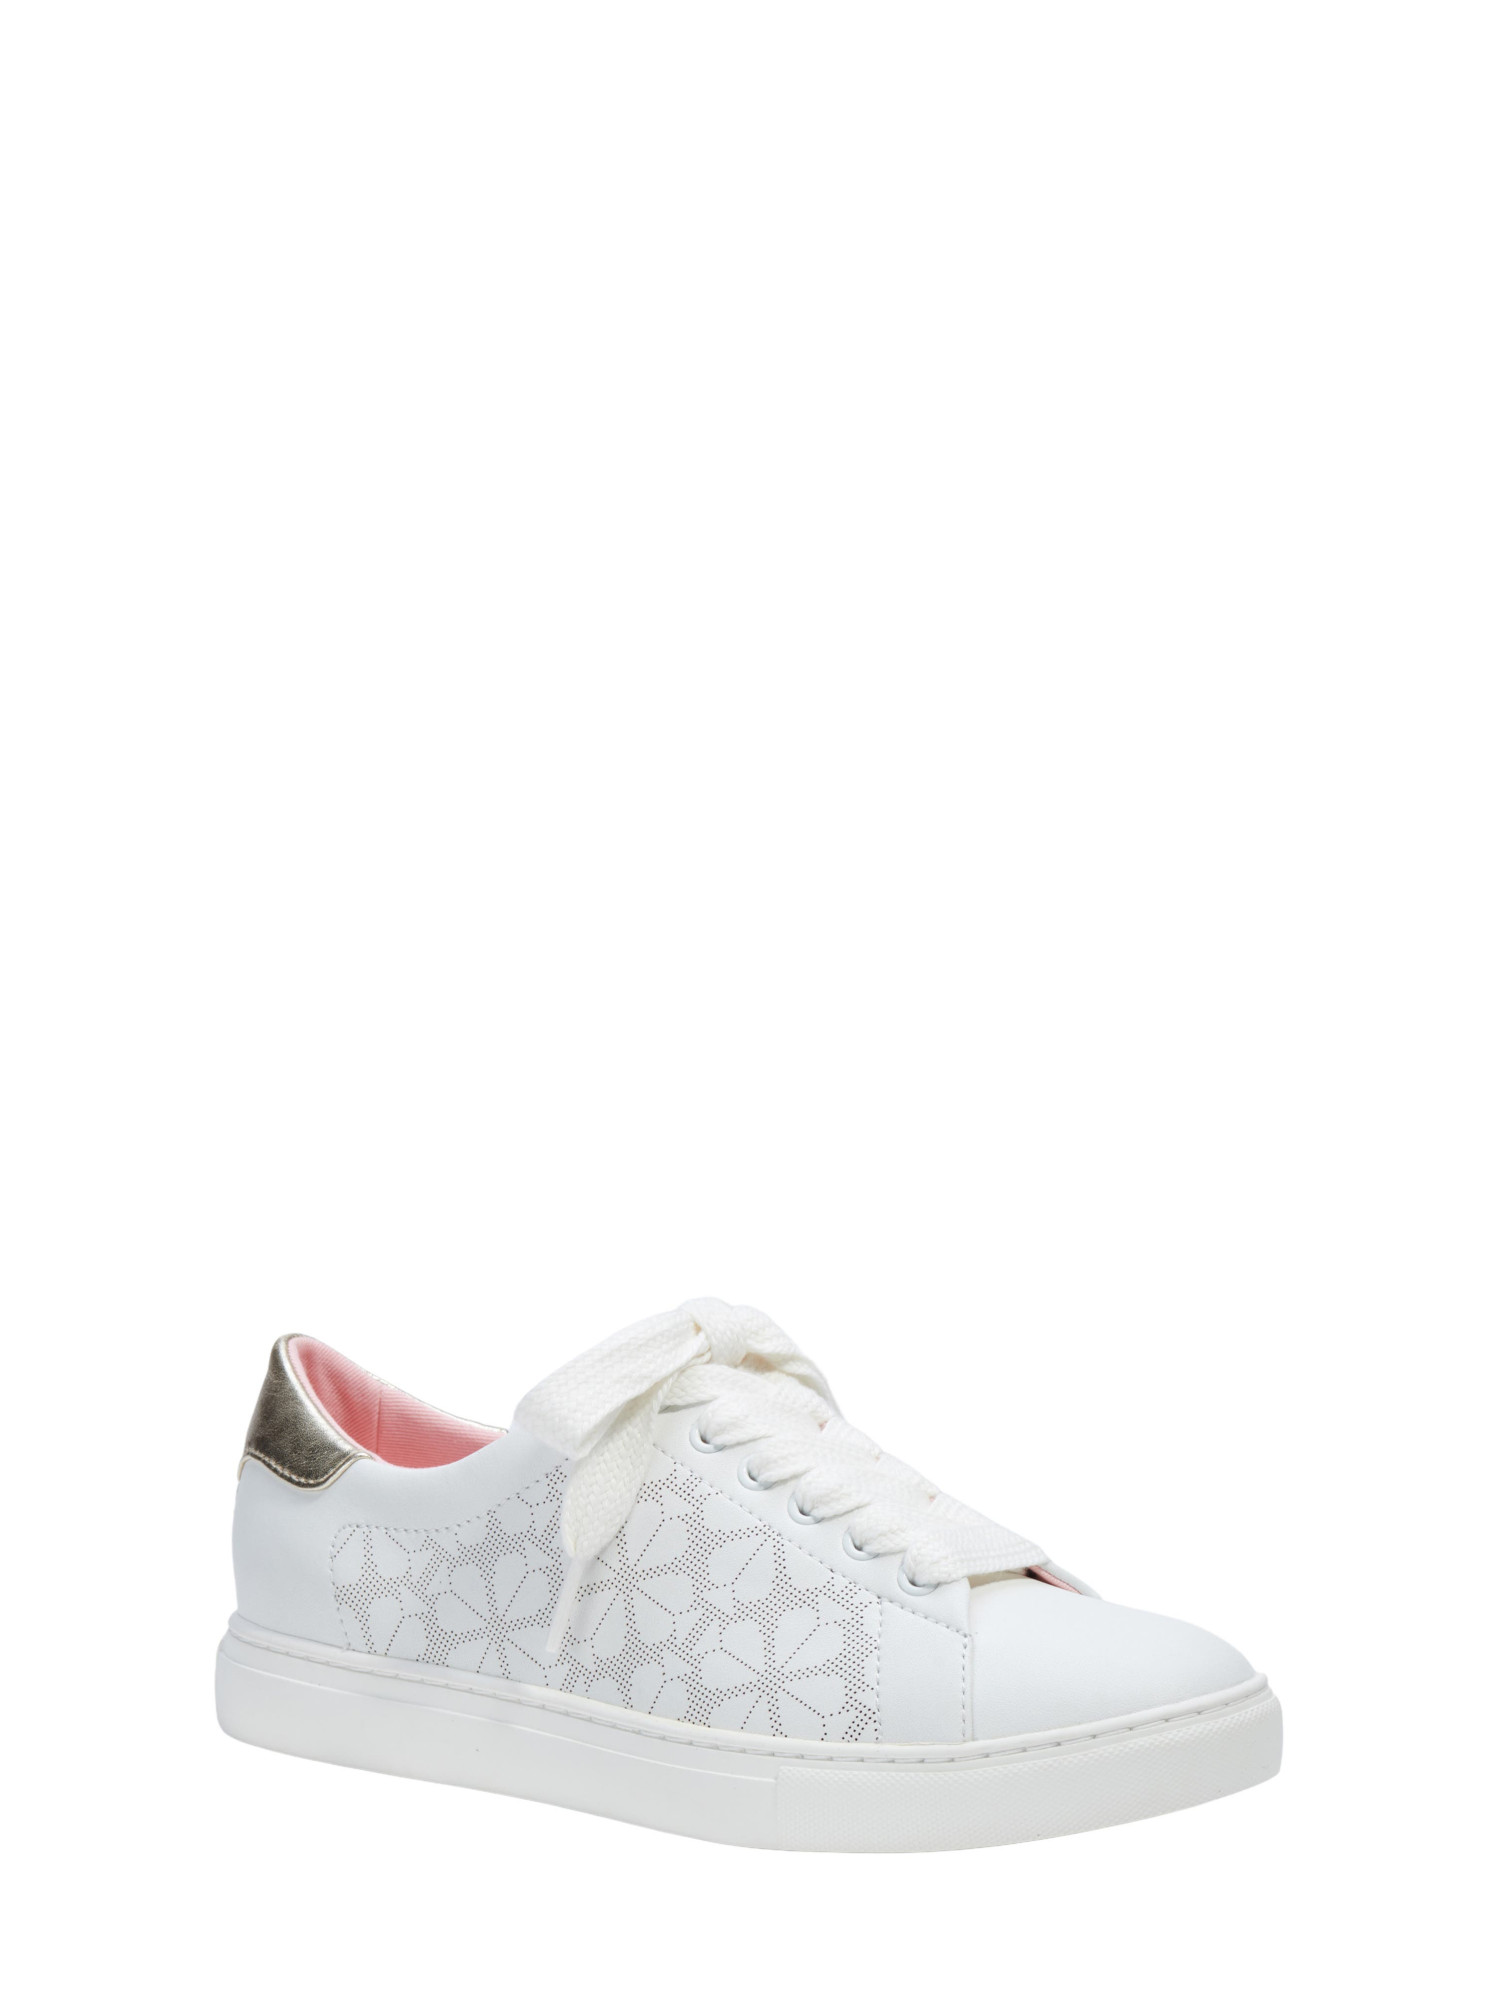 KATE SPADE NEW YORK Womens White Perforated Audrey Round Toe Platform Lace-Up Leather Sneakers Shoes 10 B